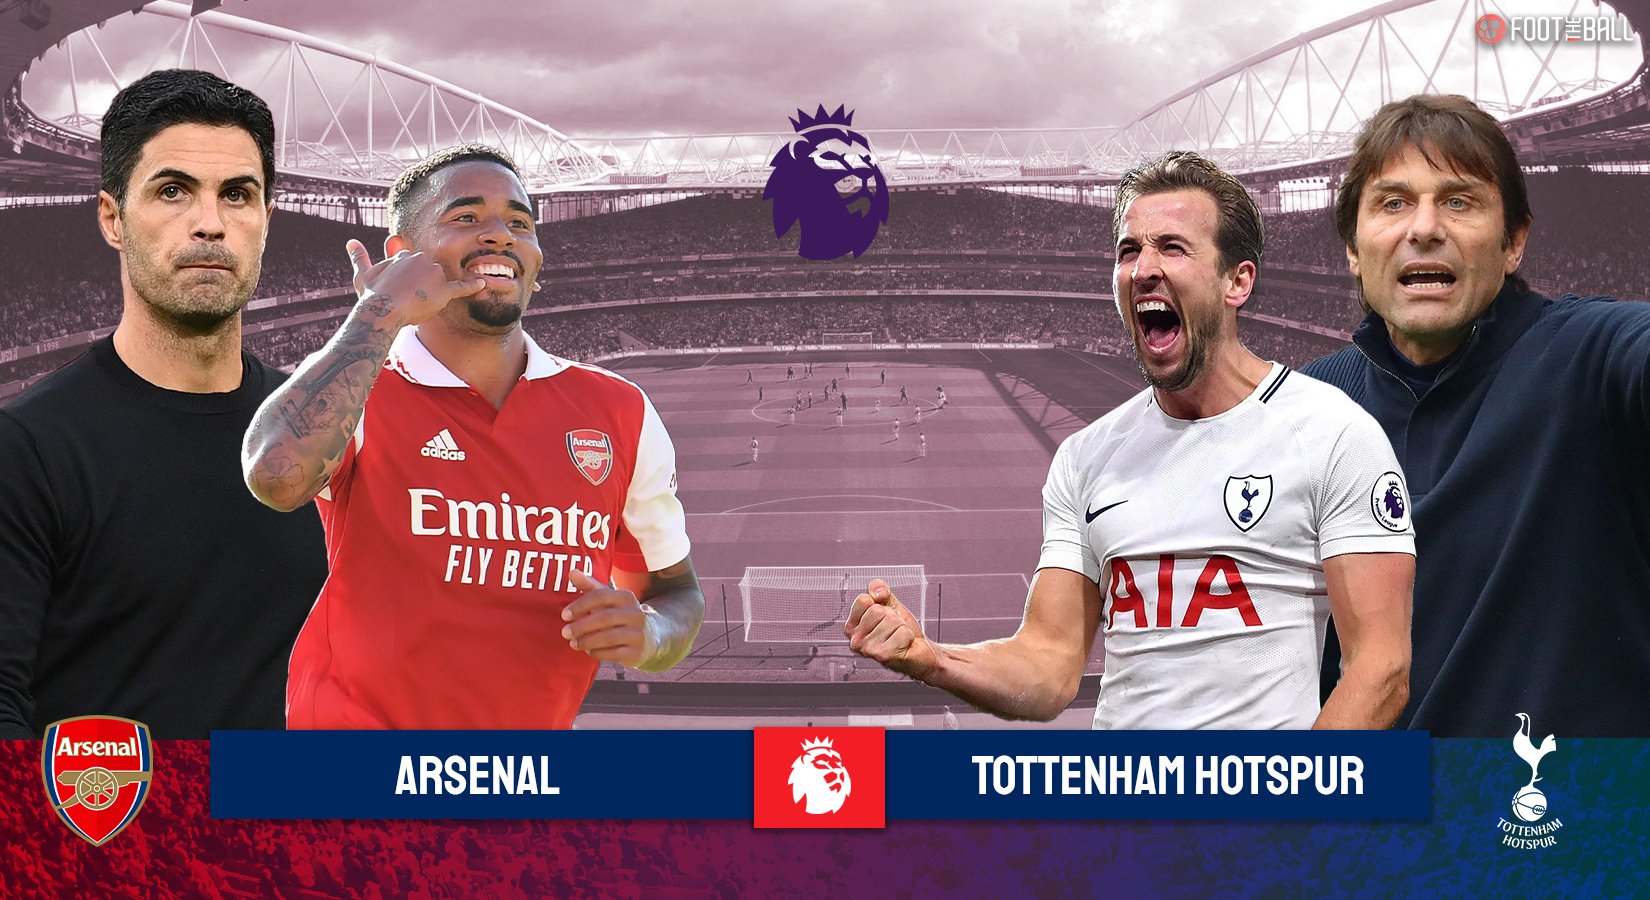 Arsenal vs Tottenham: Match Preview - Kick Off Time, Team News, Predicted Starting XI - 1 Oct, 2022